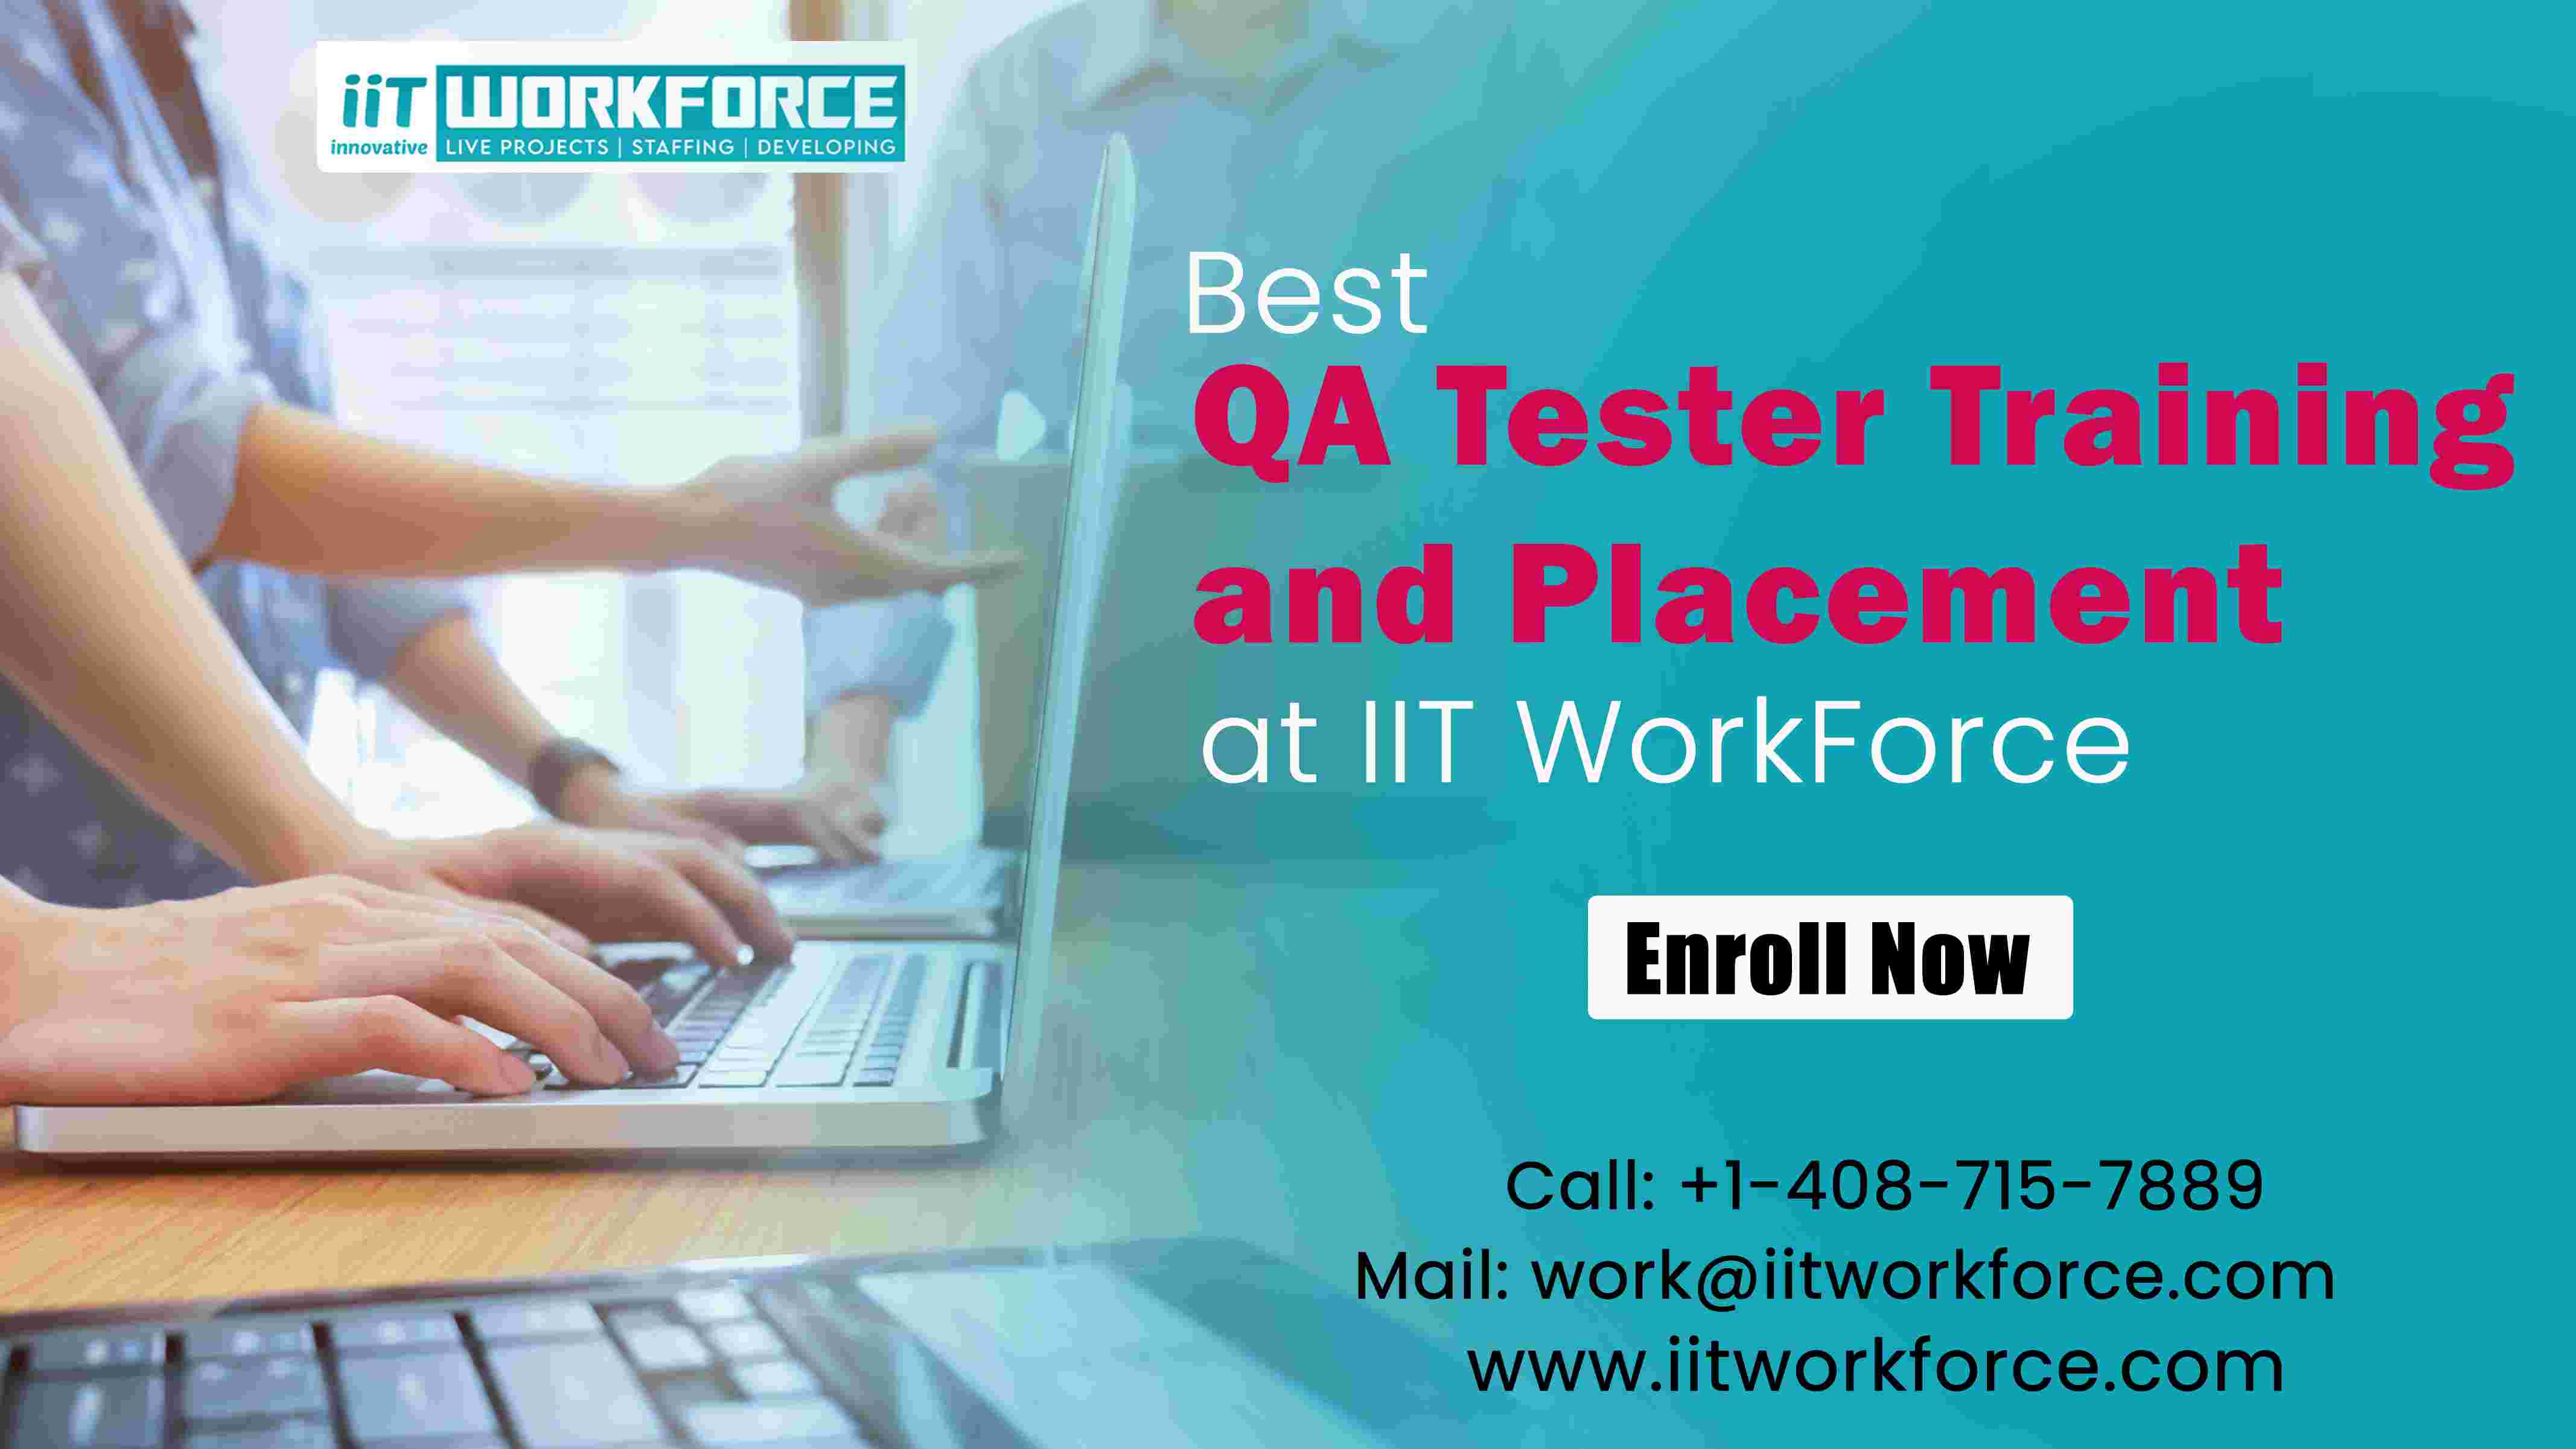 Best QA tester training and placement